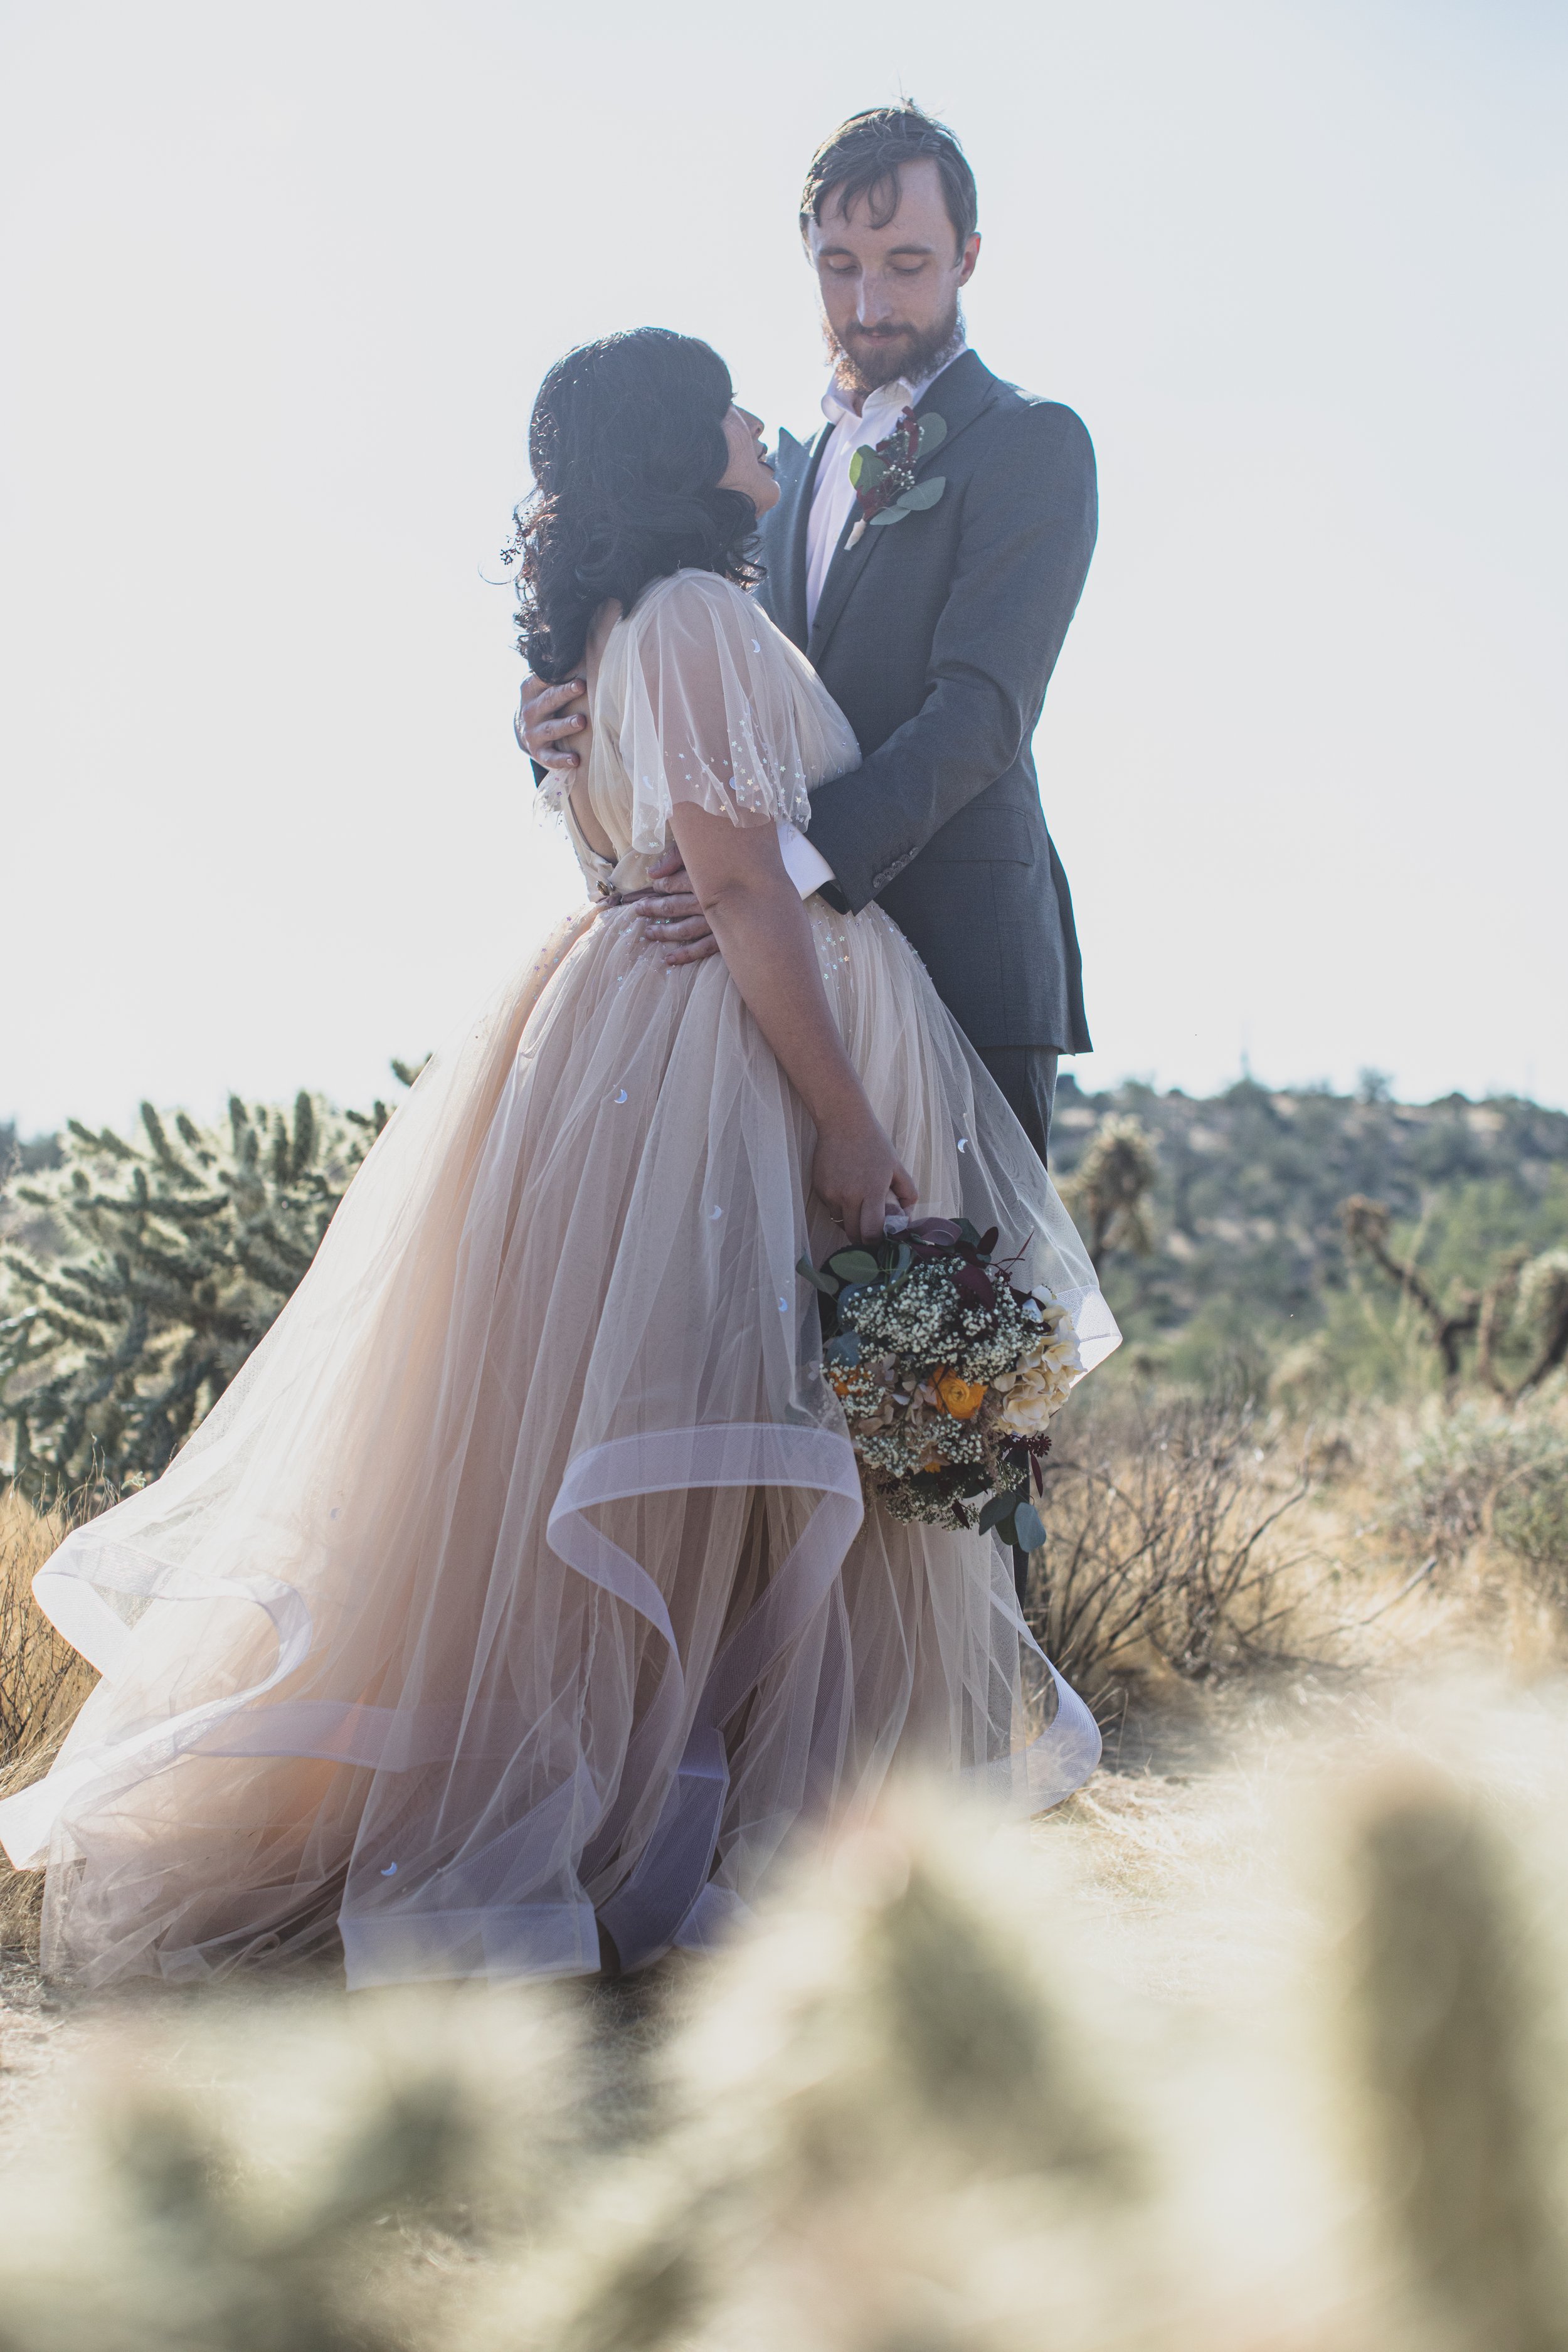 Bride and Groom share intimate moment at their Superstition Mountain intimate wedding in Arizona by outdoor wedding photographer, Jennifer Lind Schutsky. 